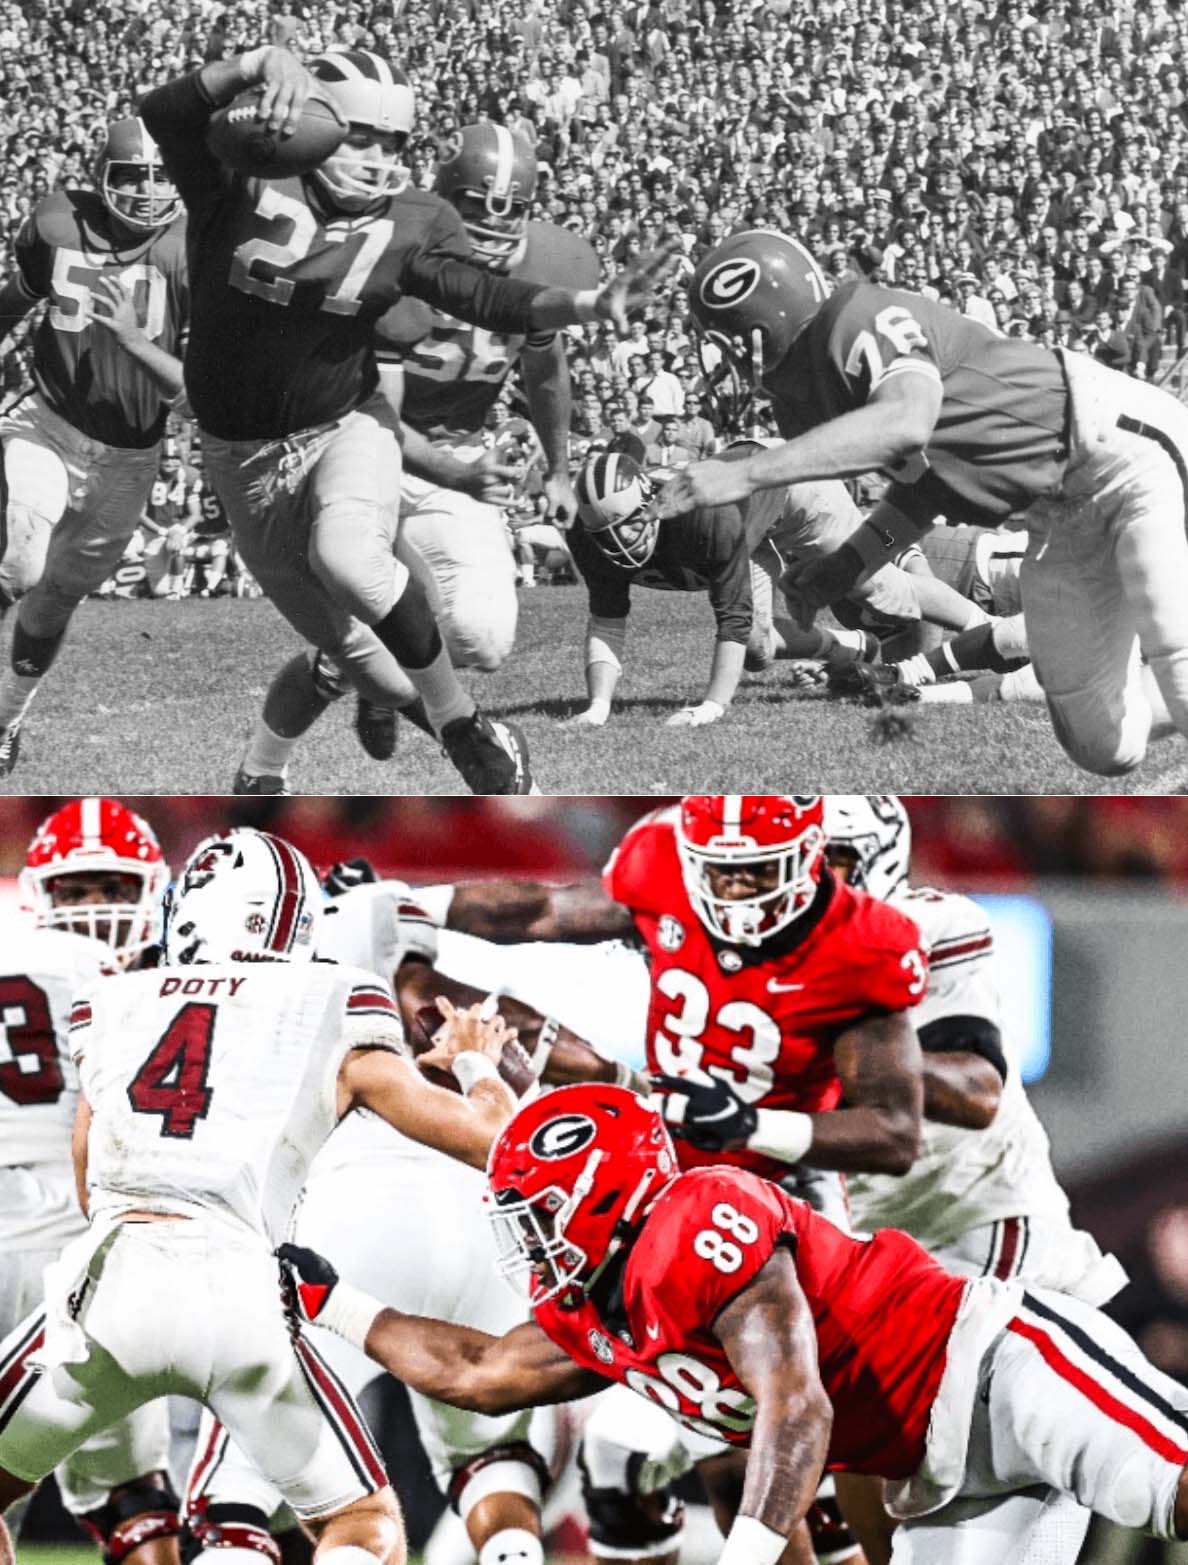 UGA uniforms in 1965 and 2021